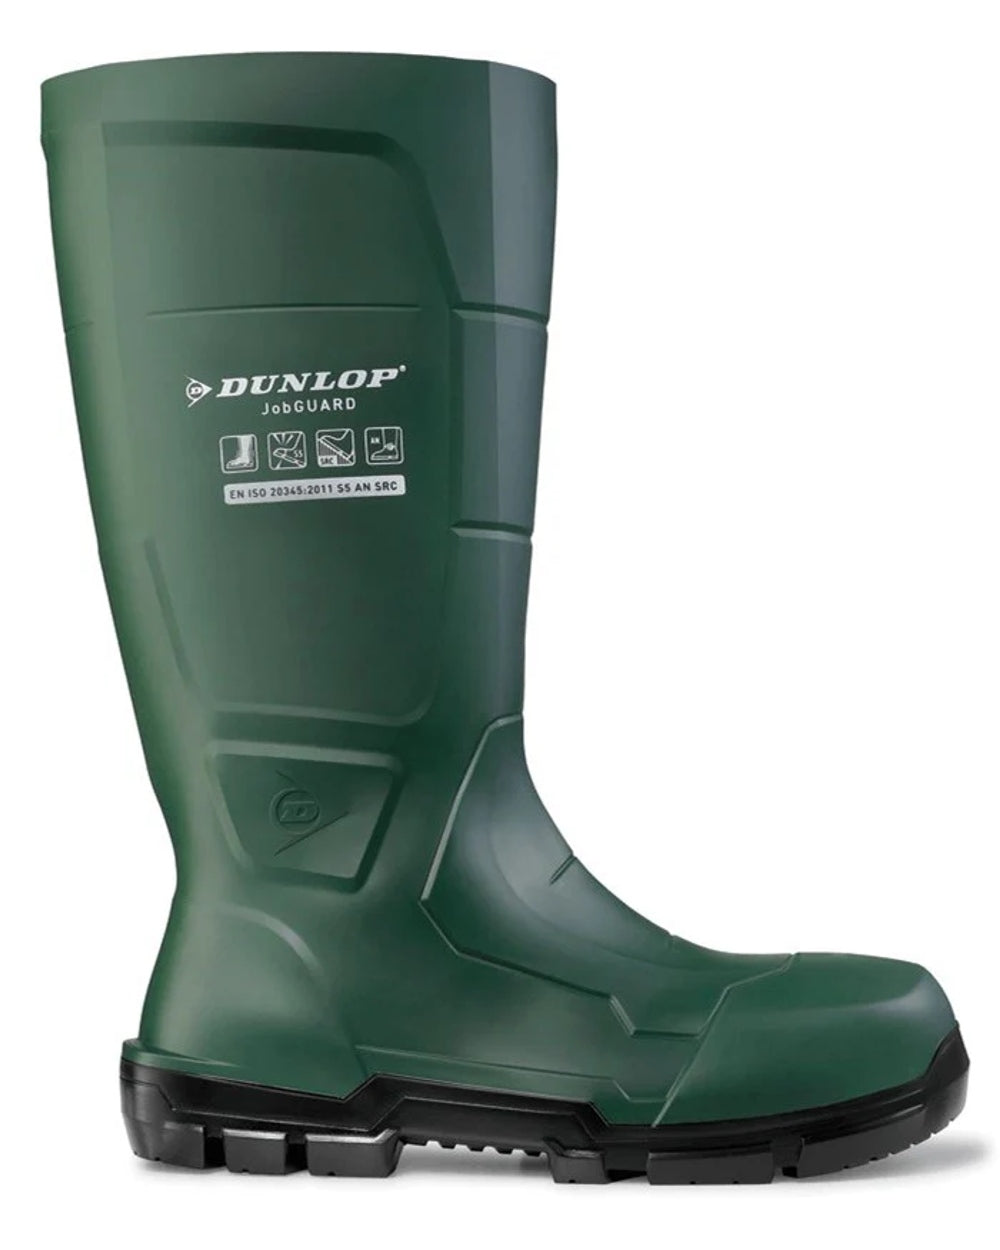 Heritage Green coloured Dunlop JobGuard Full Safety Wellingtons on white background 